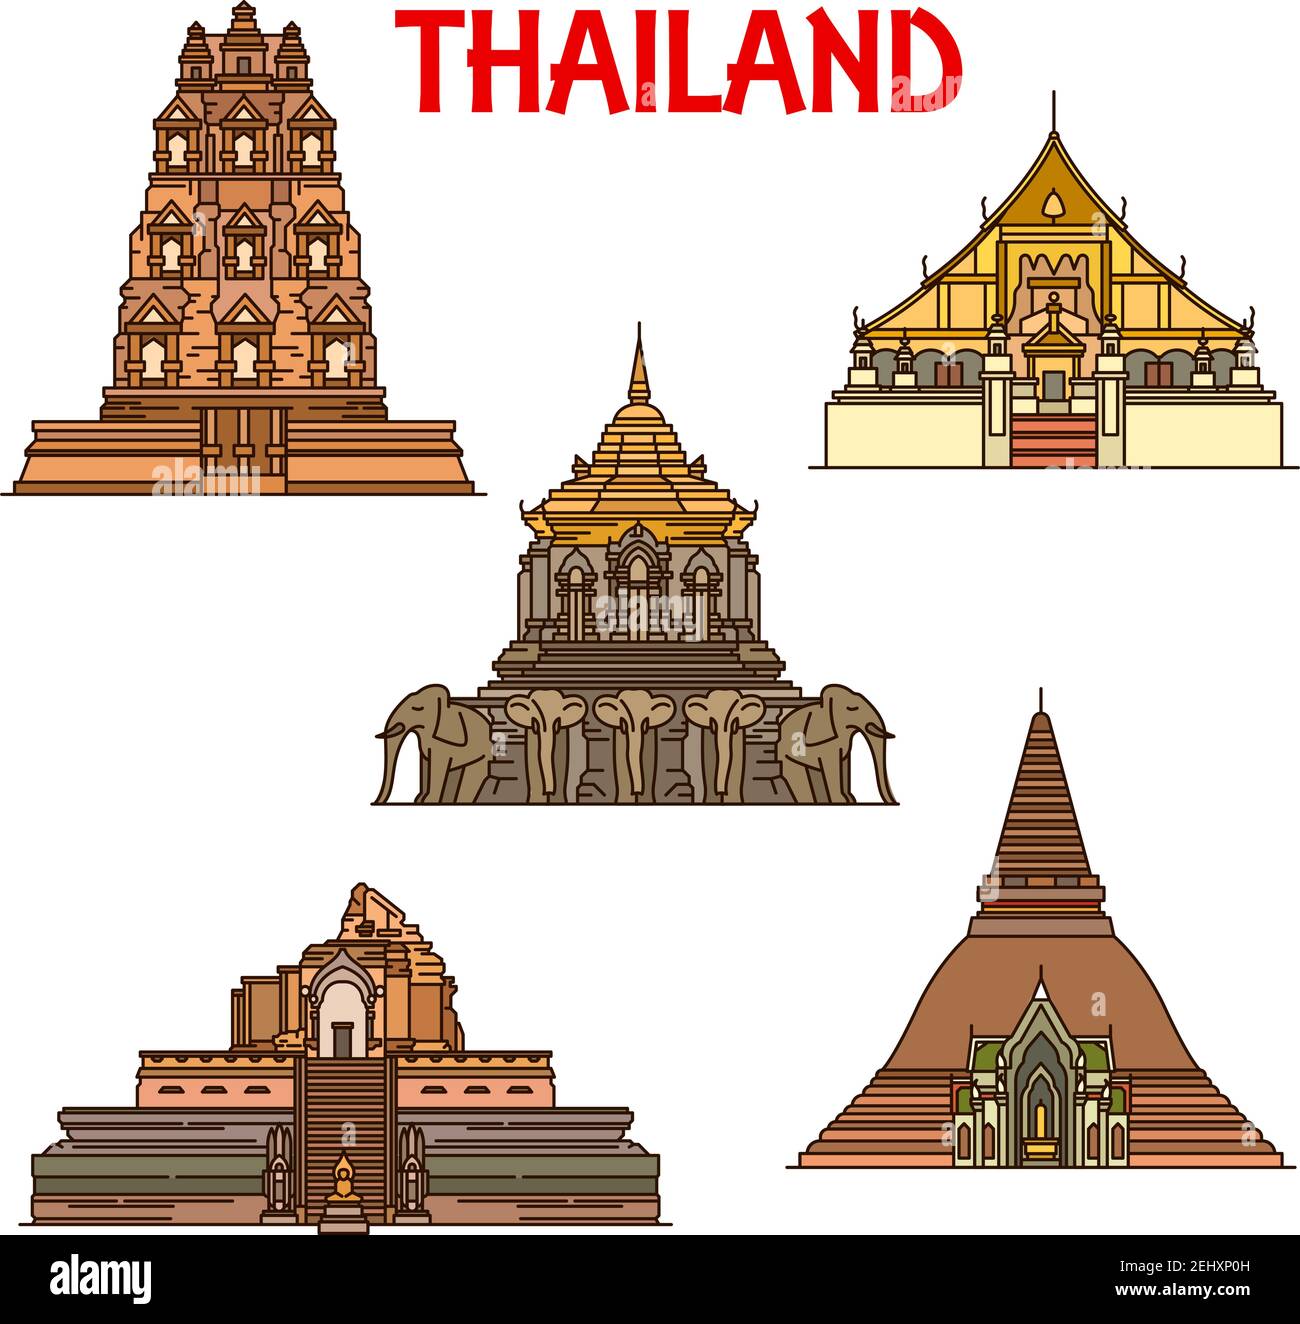 Thai travel landmark of ancient temples and stupas thin line icons. Vector Stupa Phra Pathom Chedi and Phra Mahathat, Buddhist temples of Chiang Man, Stock Vector